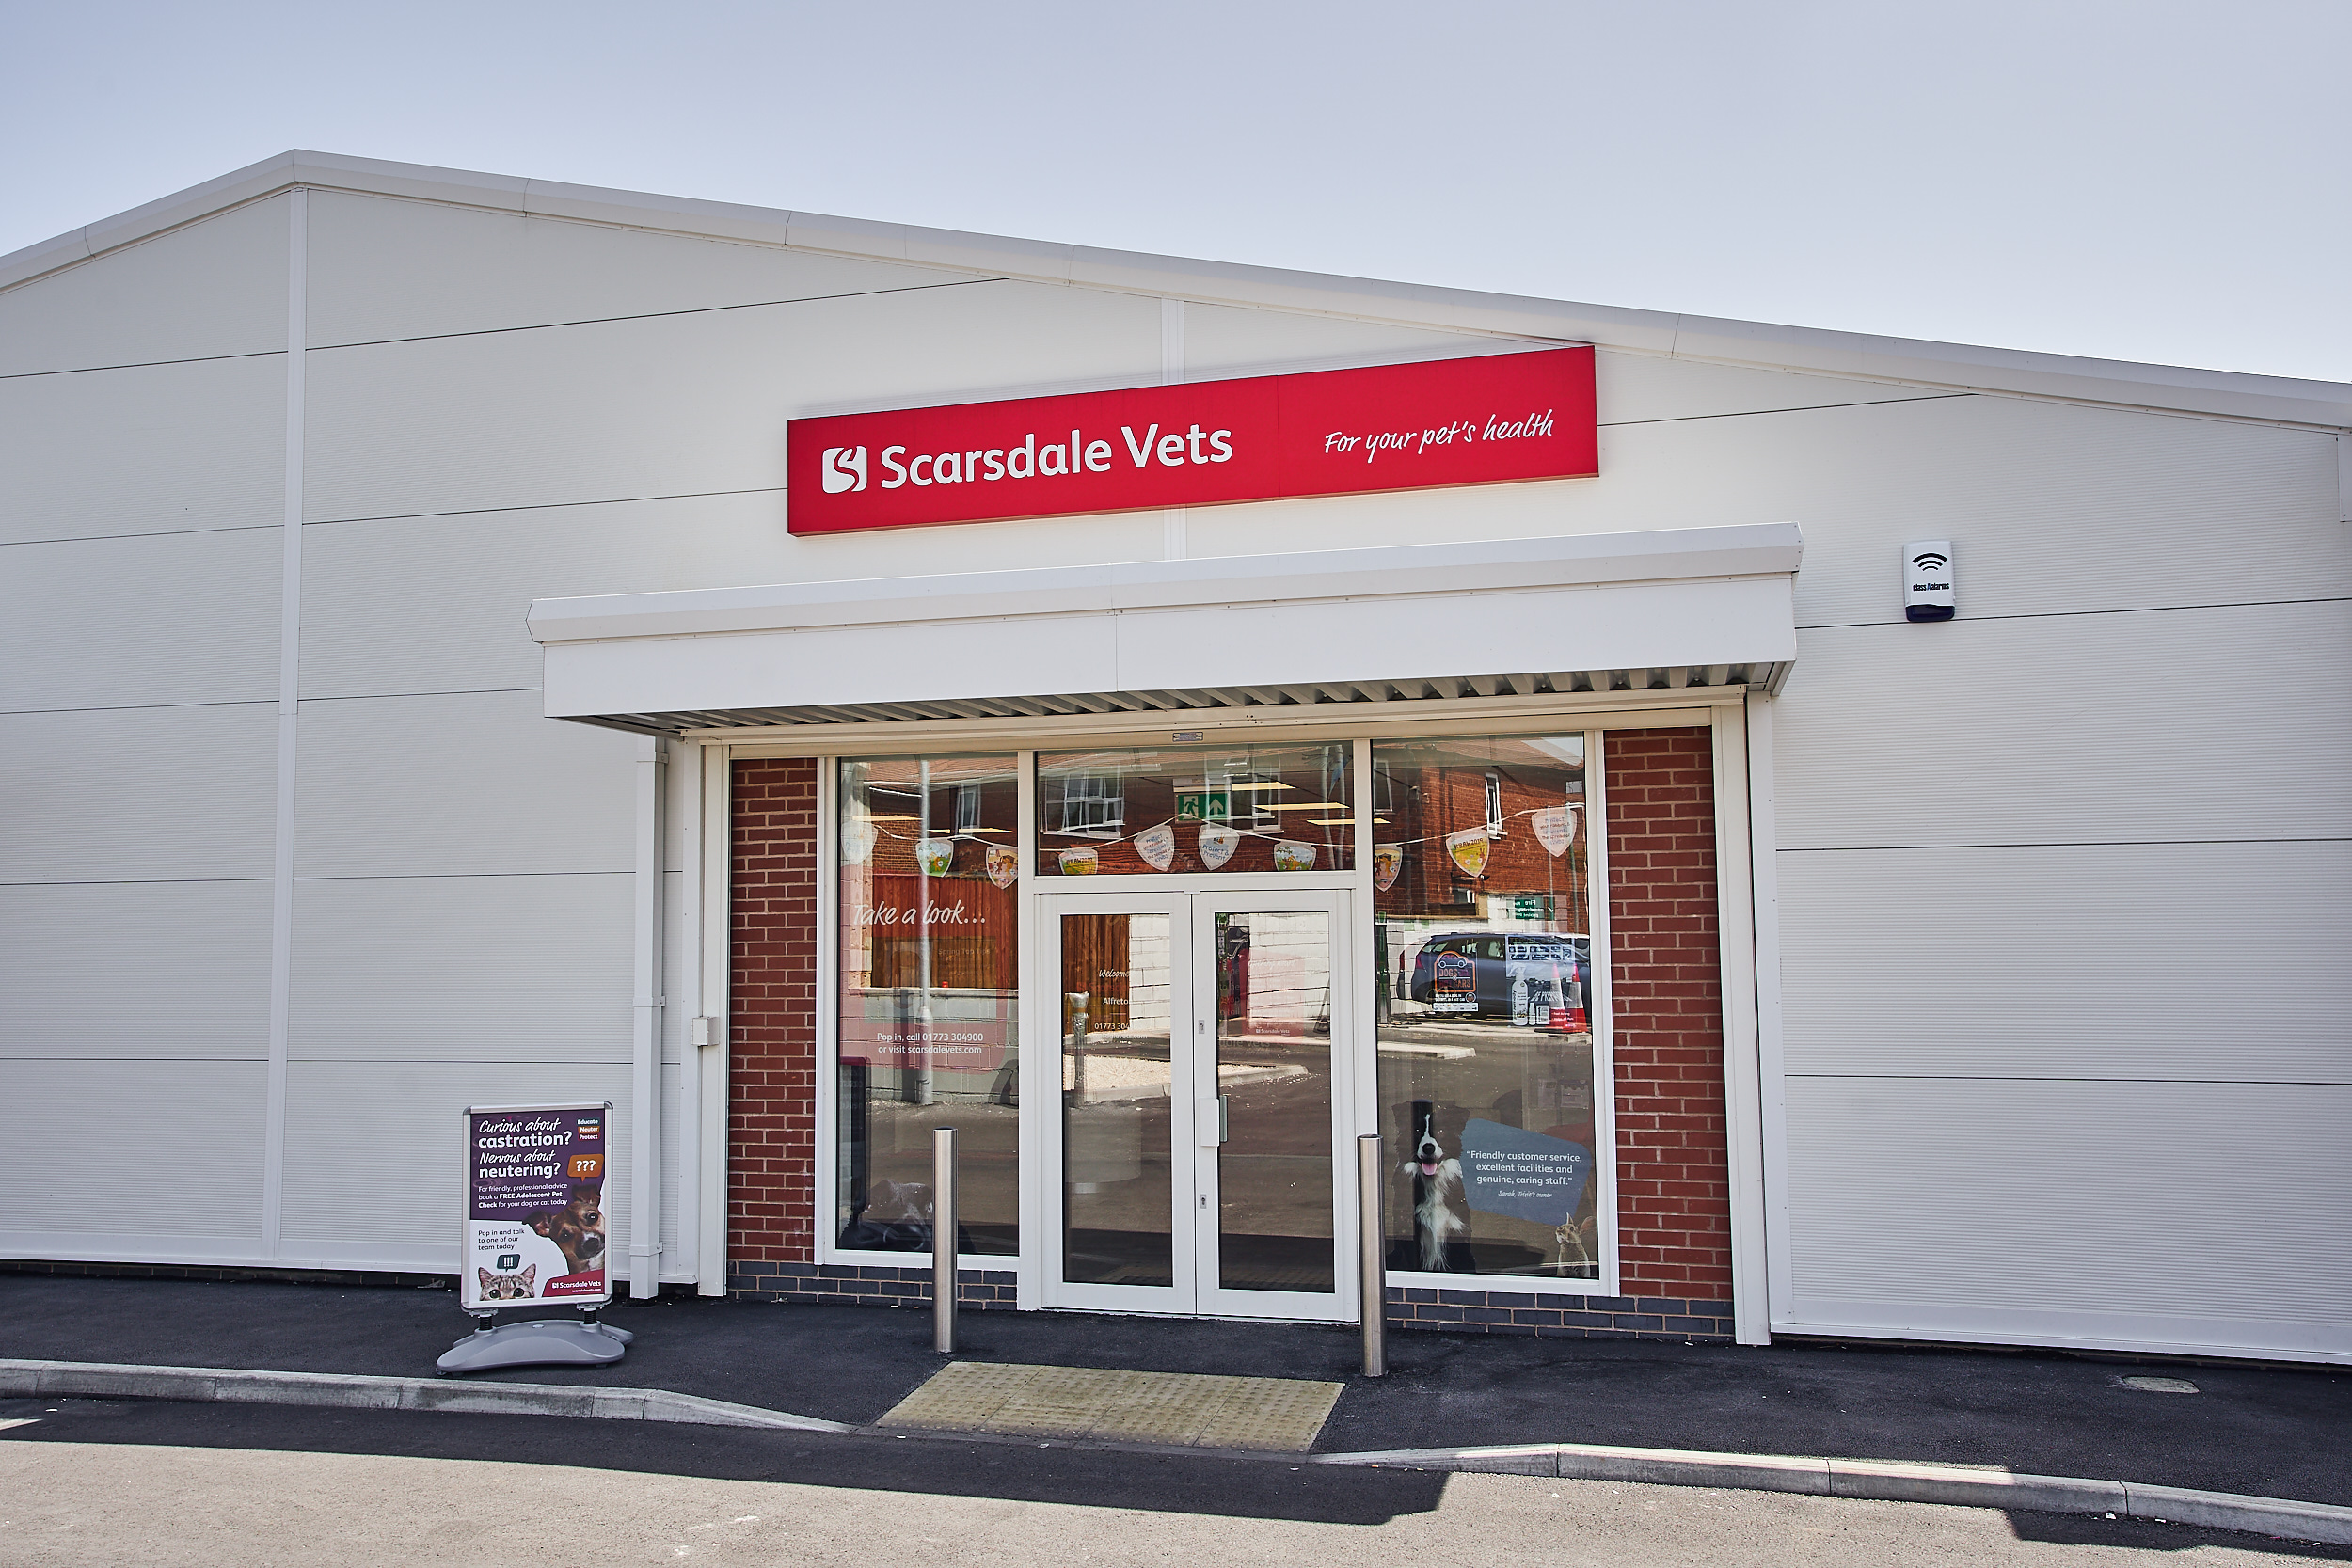 Scarsdale Vets is opening a new practice in Alfreton